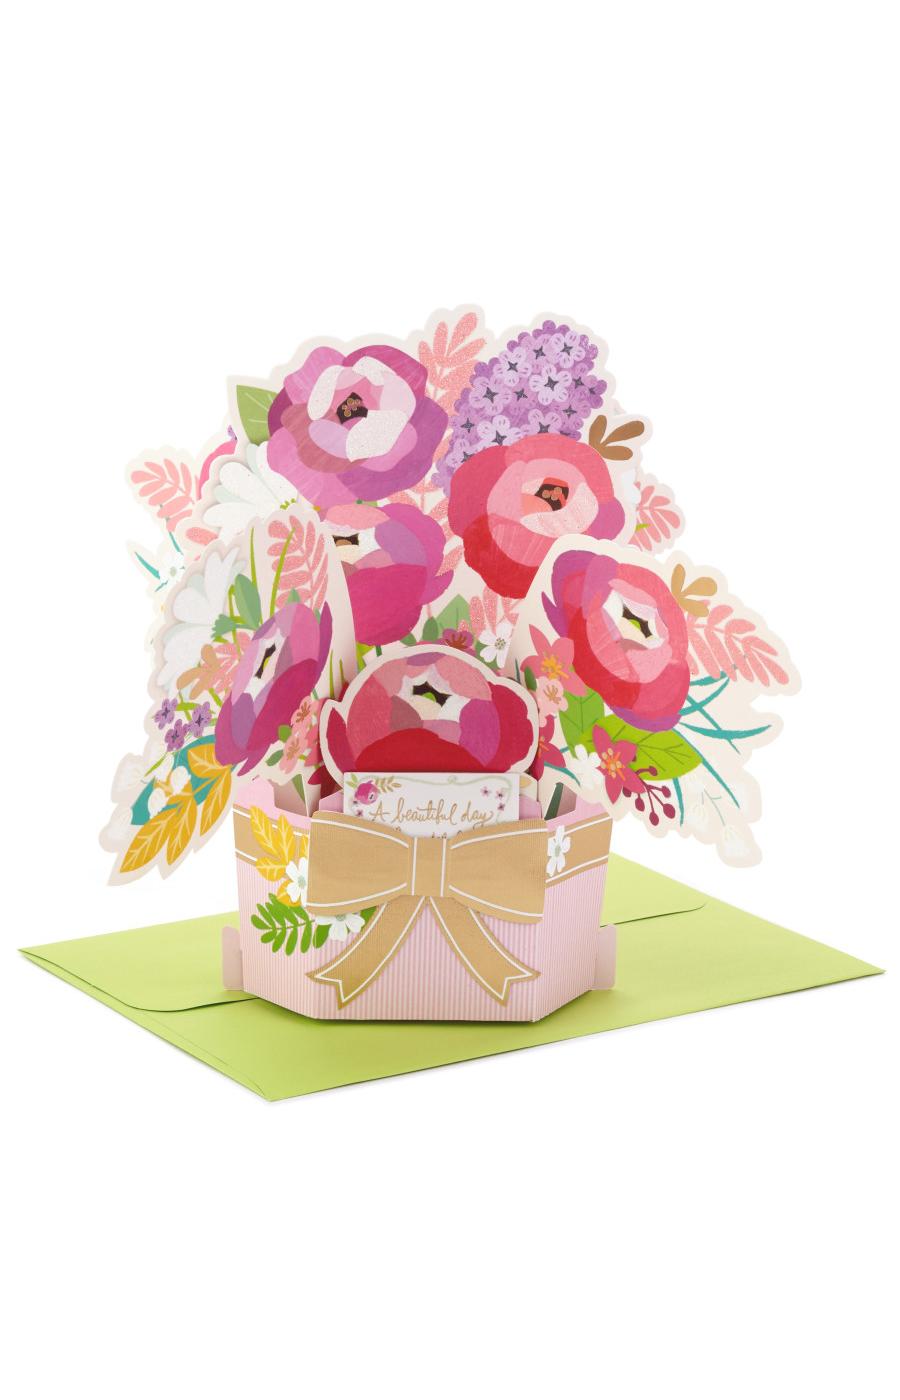 Hallmark Beautiful Day Paper Wonder Pop-Up 3D Birthday Card for Her - E41; image 1 of 4